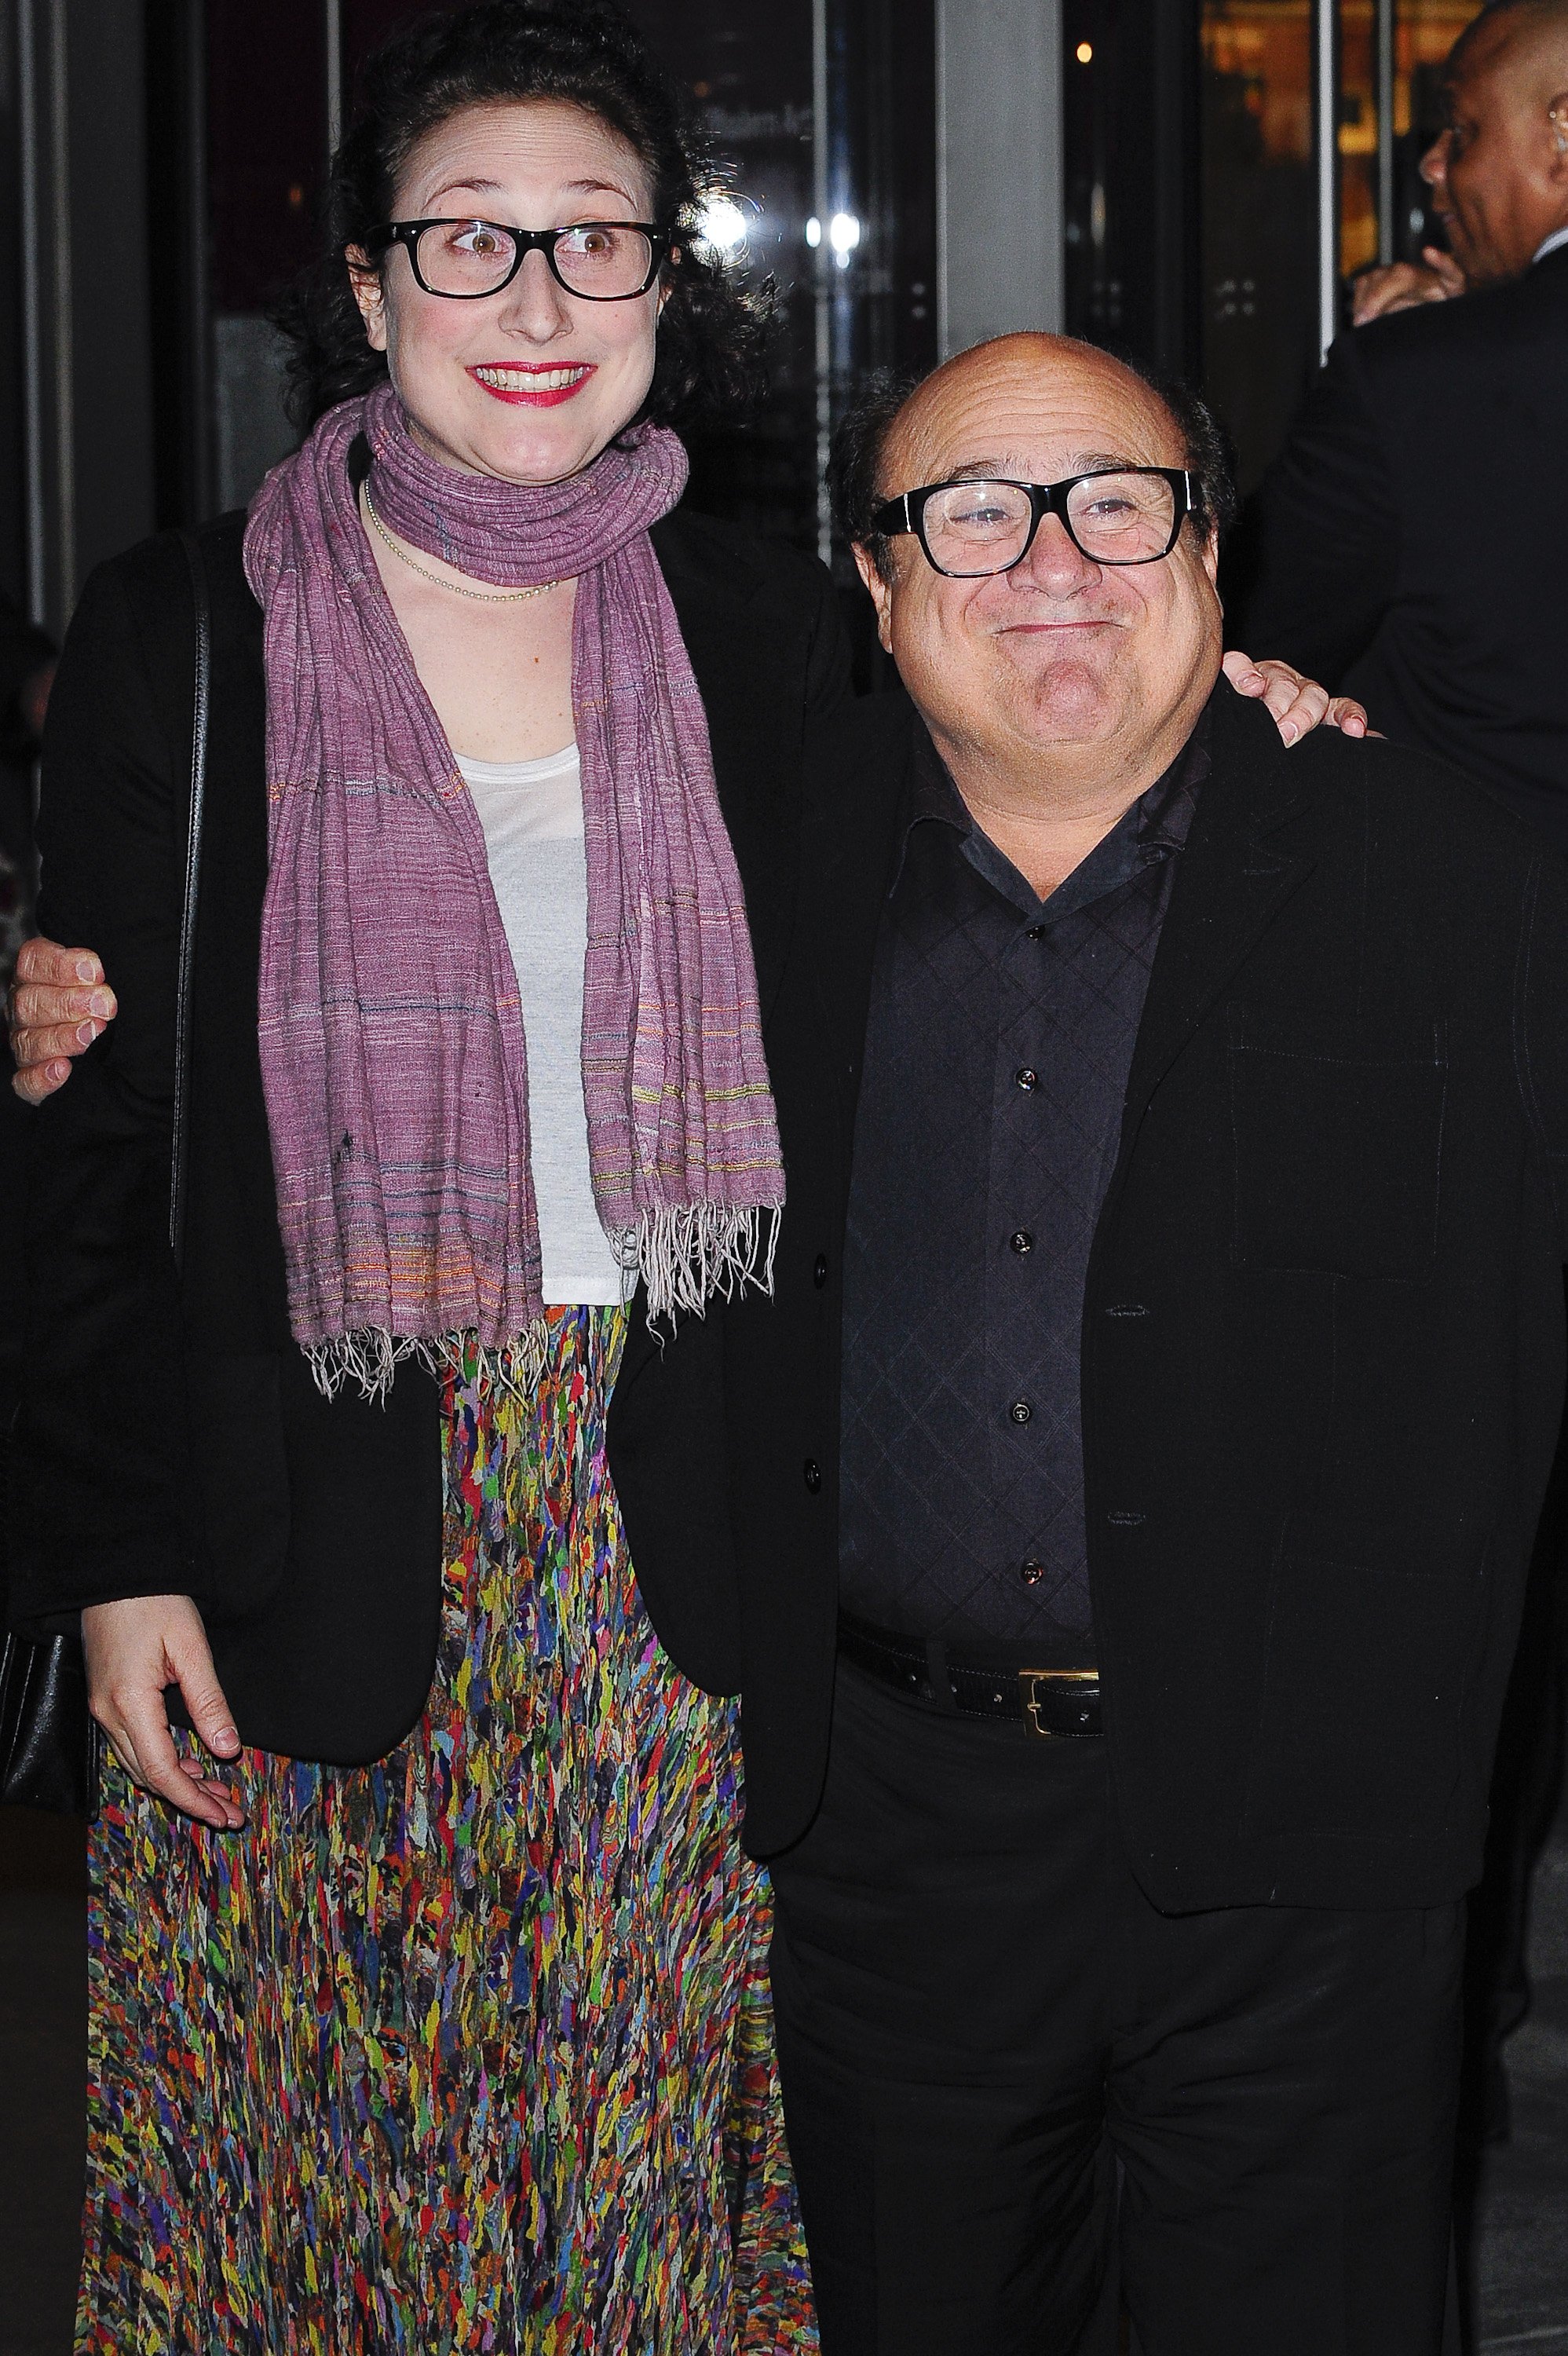 Danny DeVito and Gracie DeVito visit the Museum of Modern Art on November 17, 2009 in New York City. | Source: Getty Images